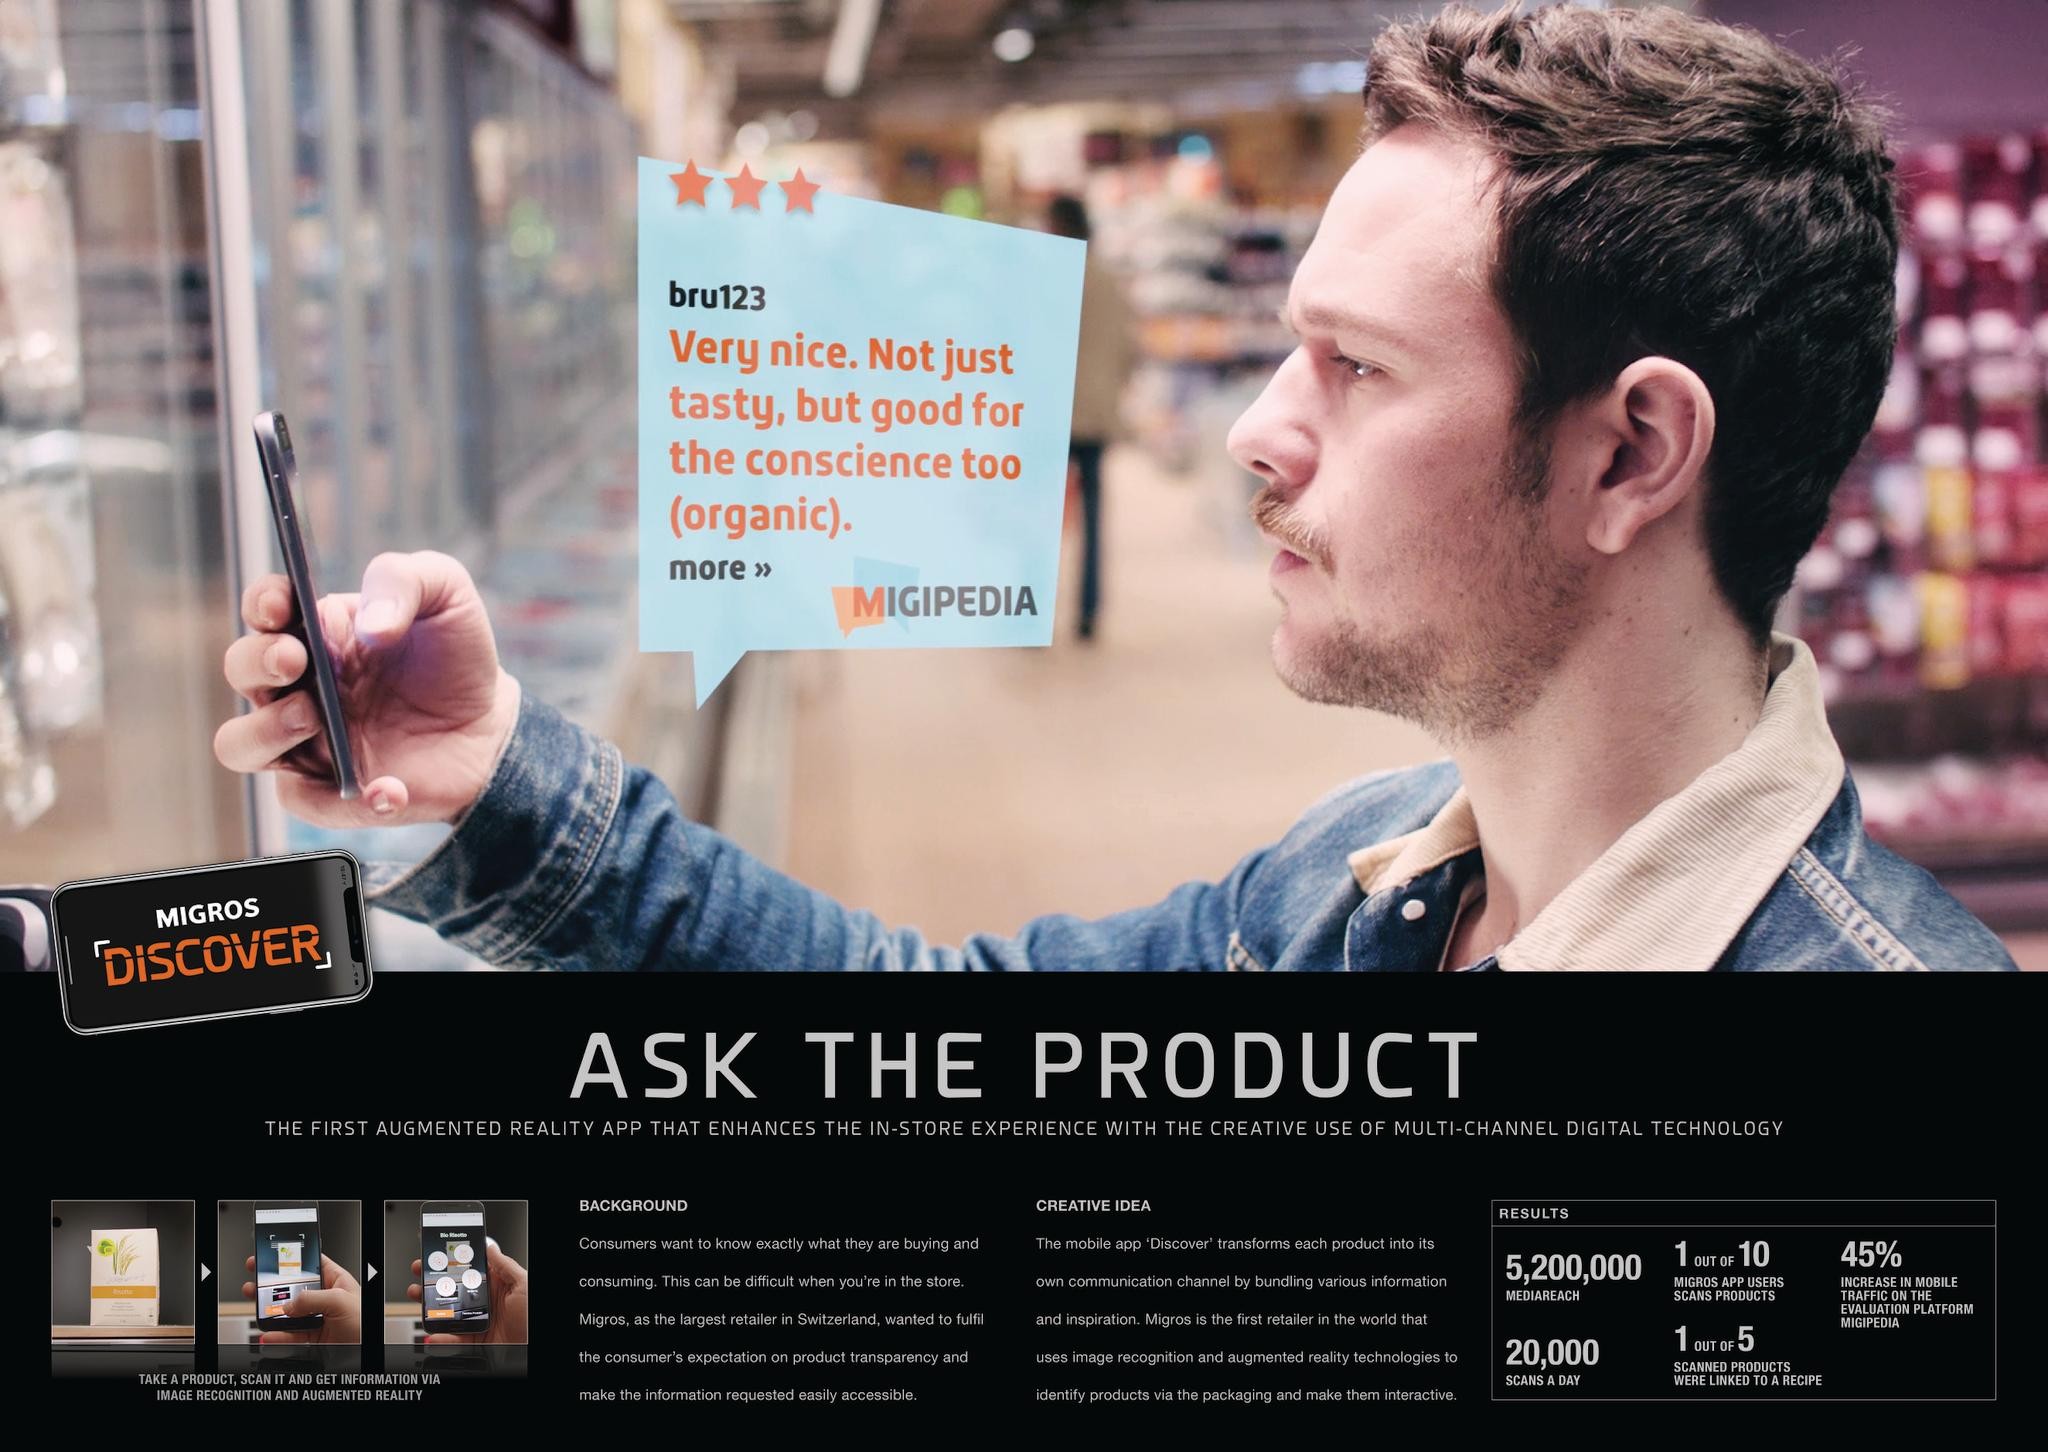 MIGROS DISCOVER: ASK THE PRODUCT 